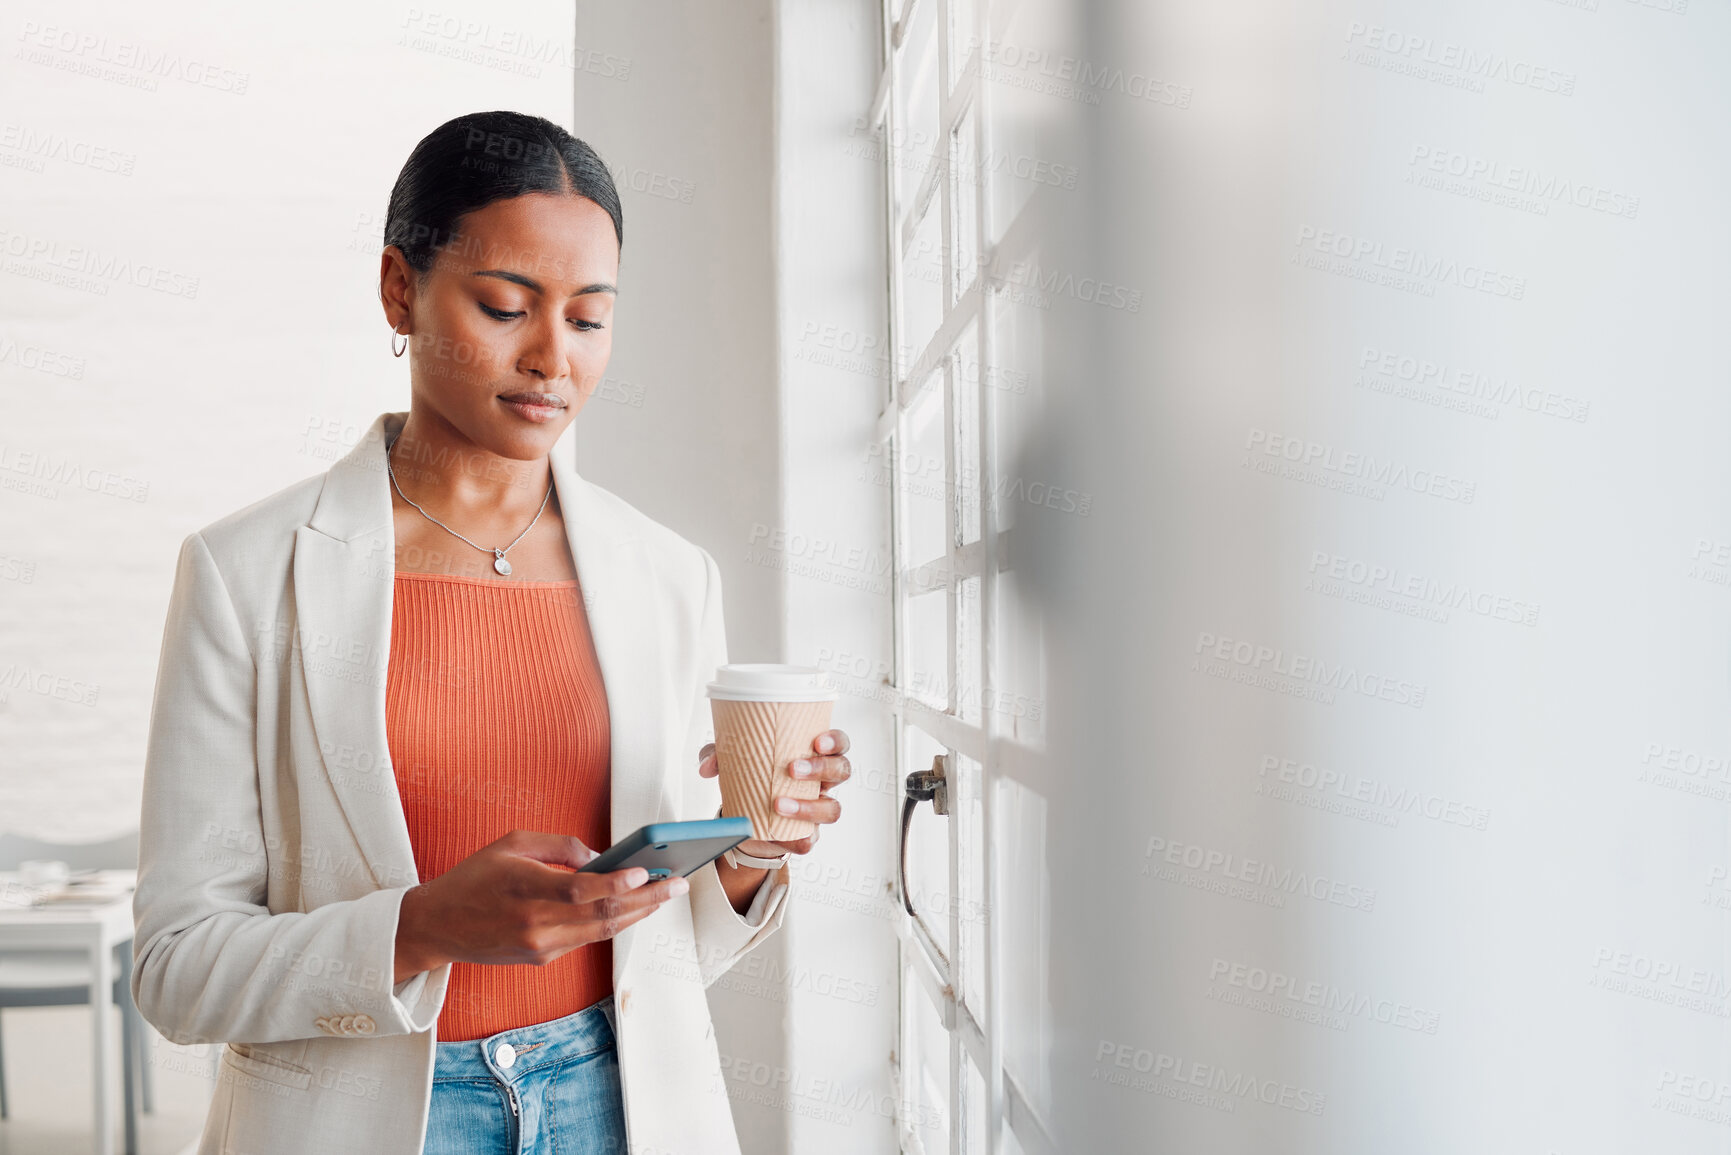 Buy stock photo Young mixed race businesswoman using her phone while drinking a coffee alone in an office at work. Confident hispanic businessperson using social media on her cellphone while holding a coffee cup on a break while standing at work